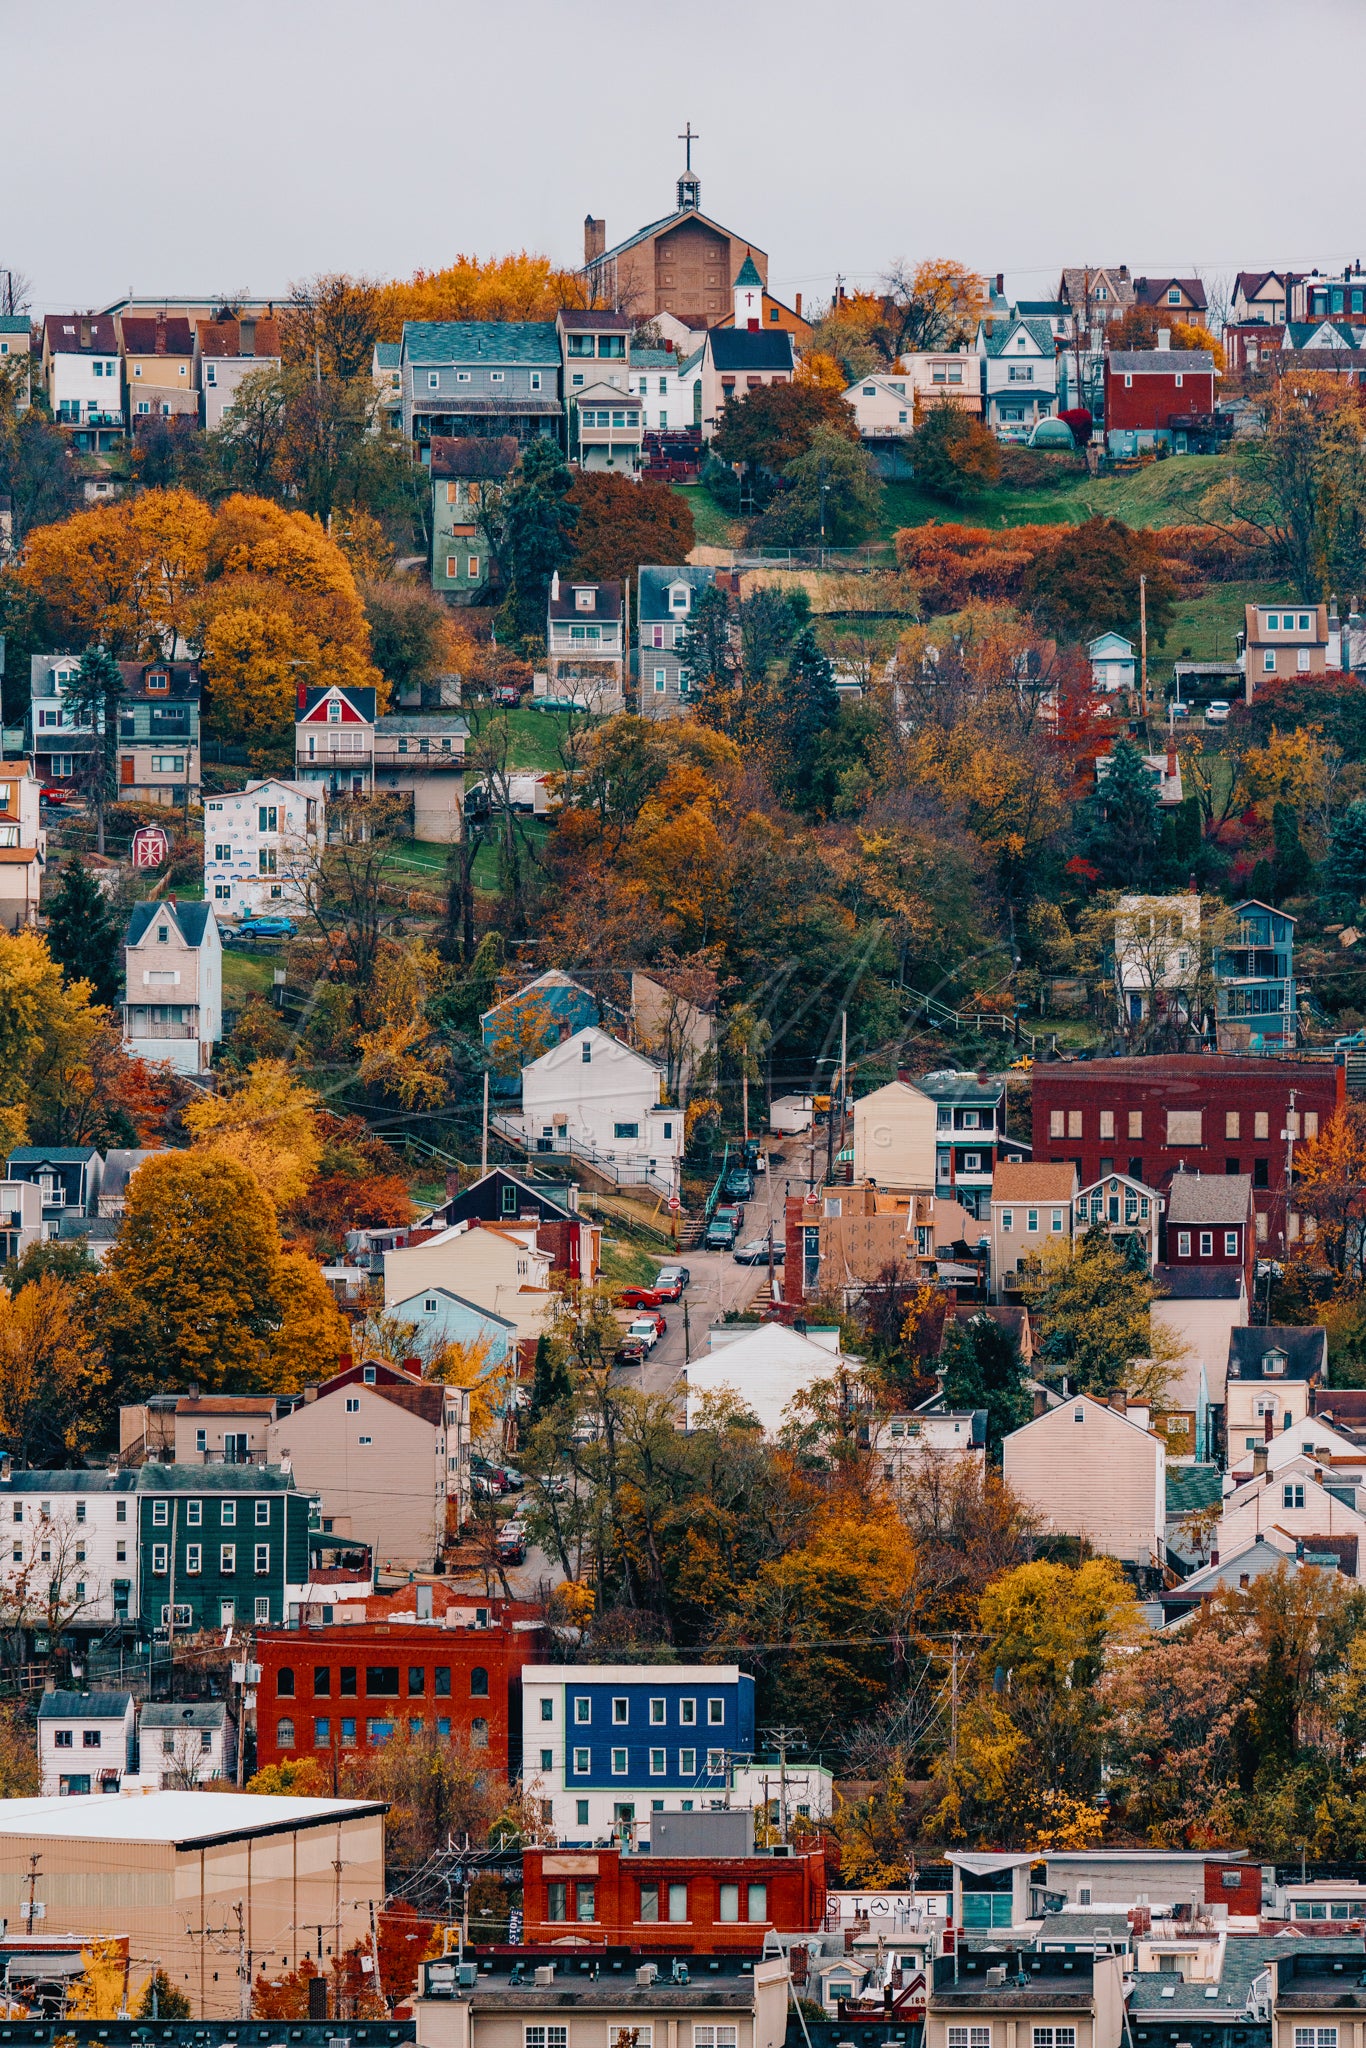 South Side Slopes and Church in Fall